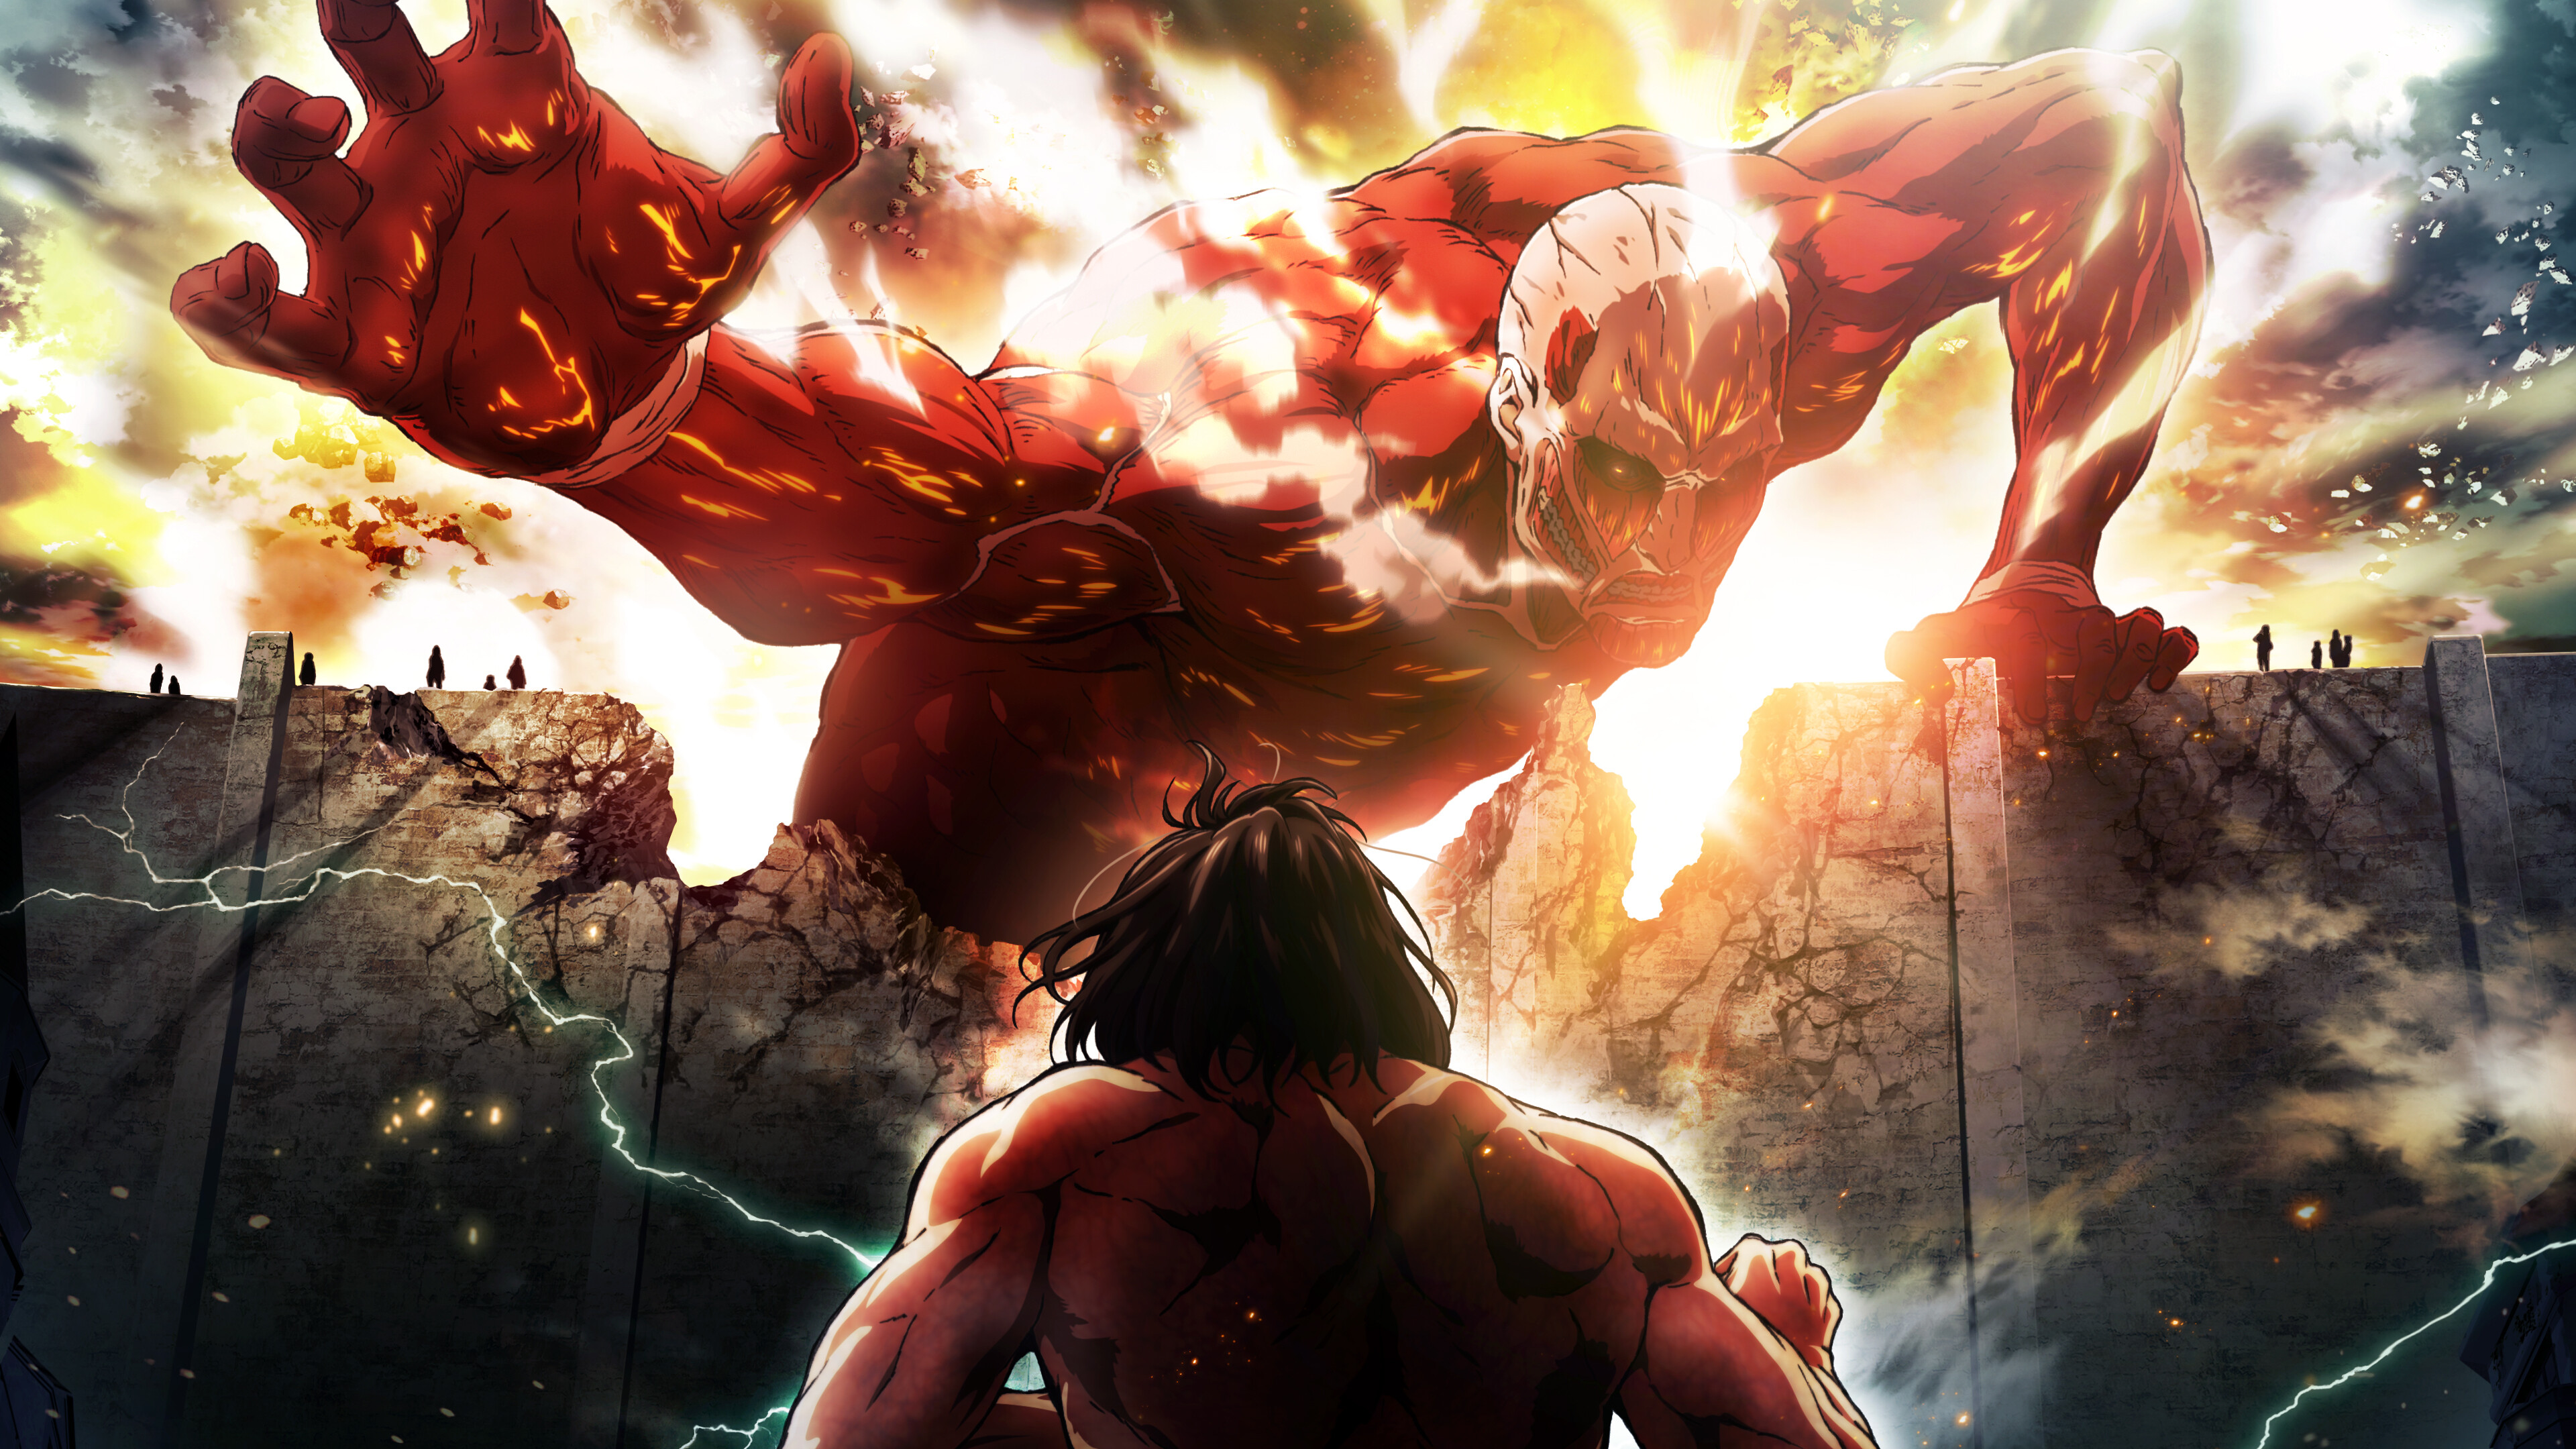 Attack on Titan: The Final Season: The Colossal Titan, serves as the primary antagonist of the first three seasons. 3840x2160 4K Wallpaper.